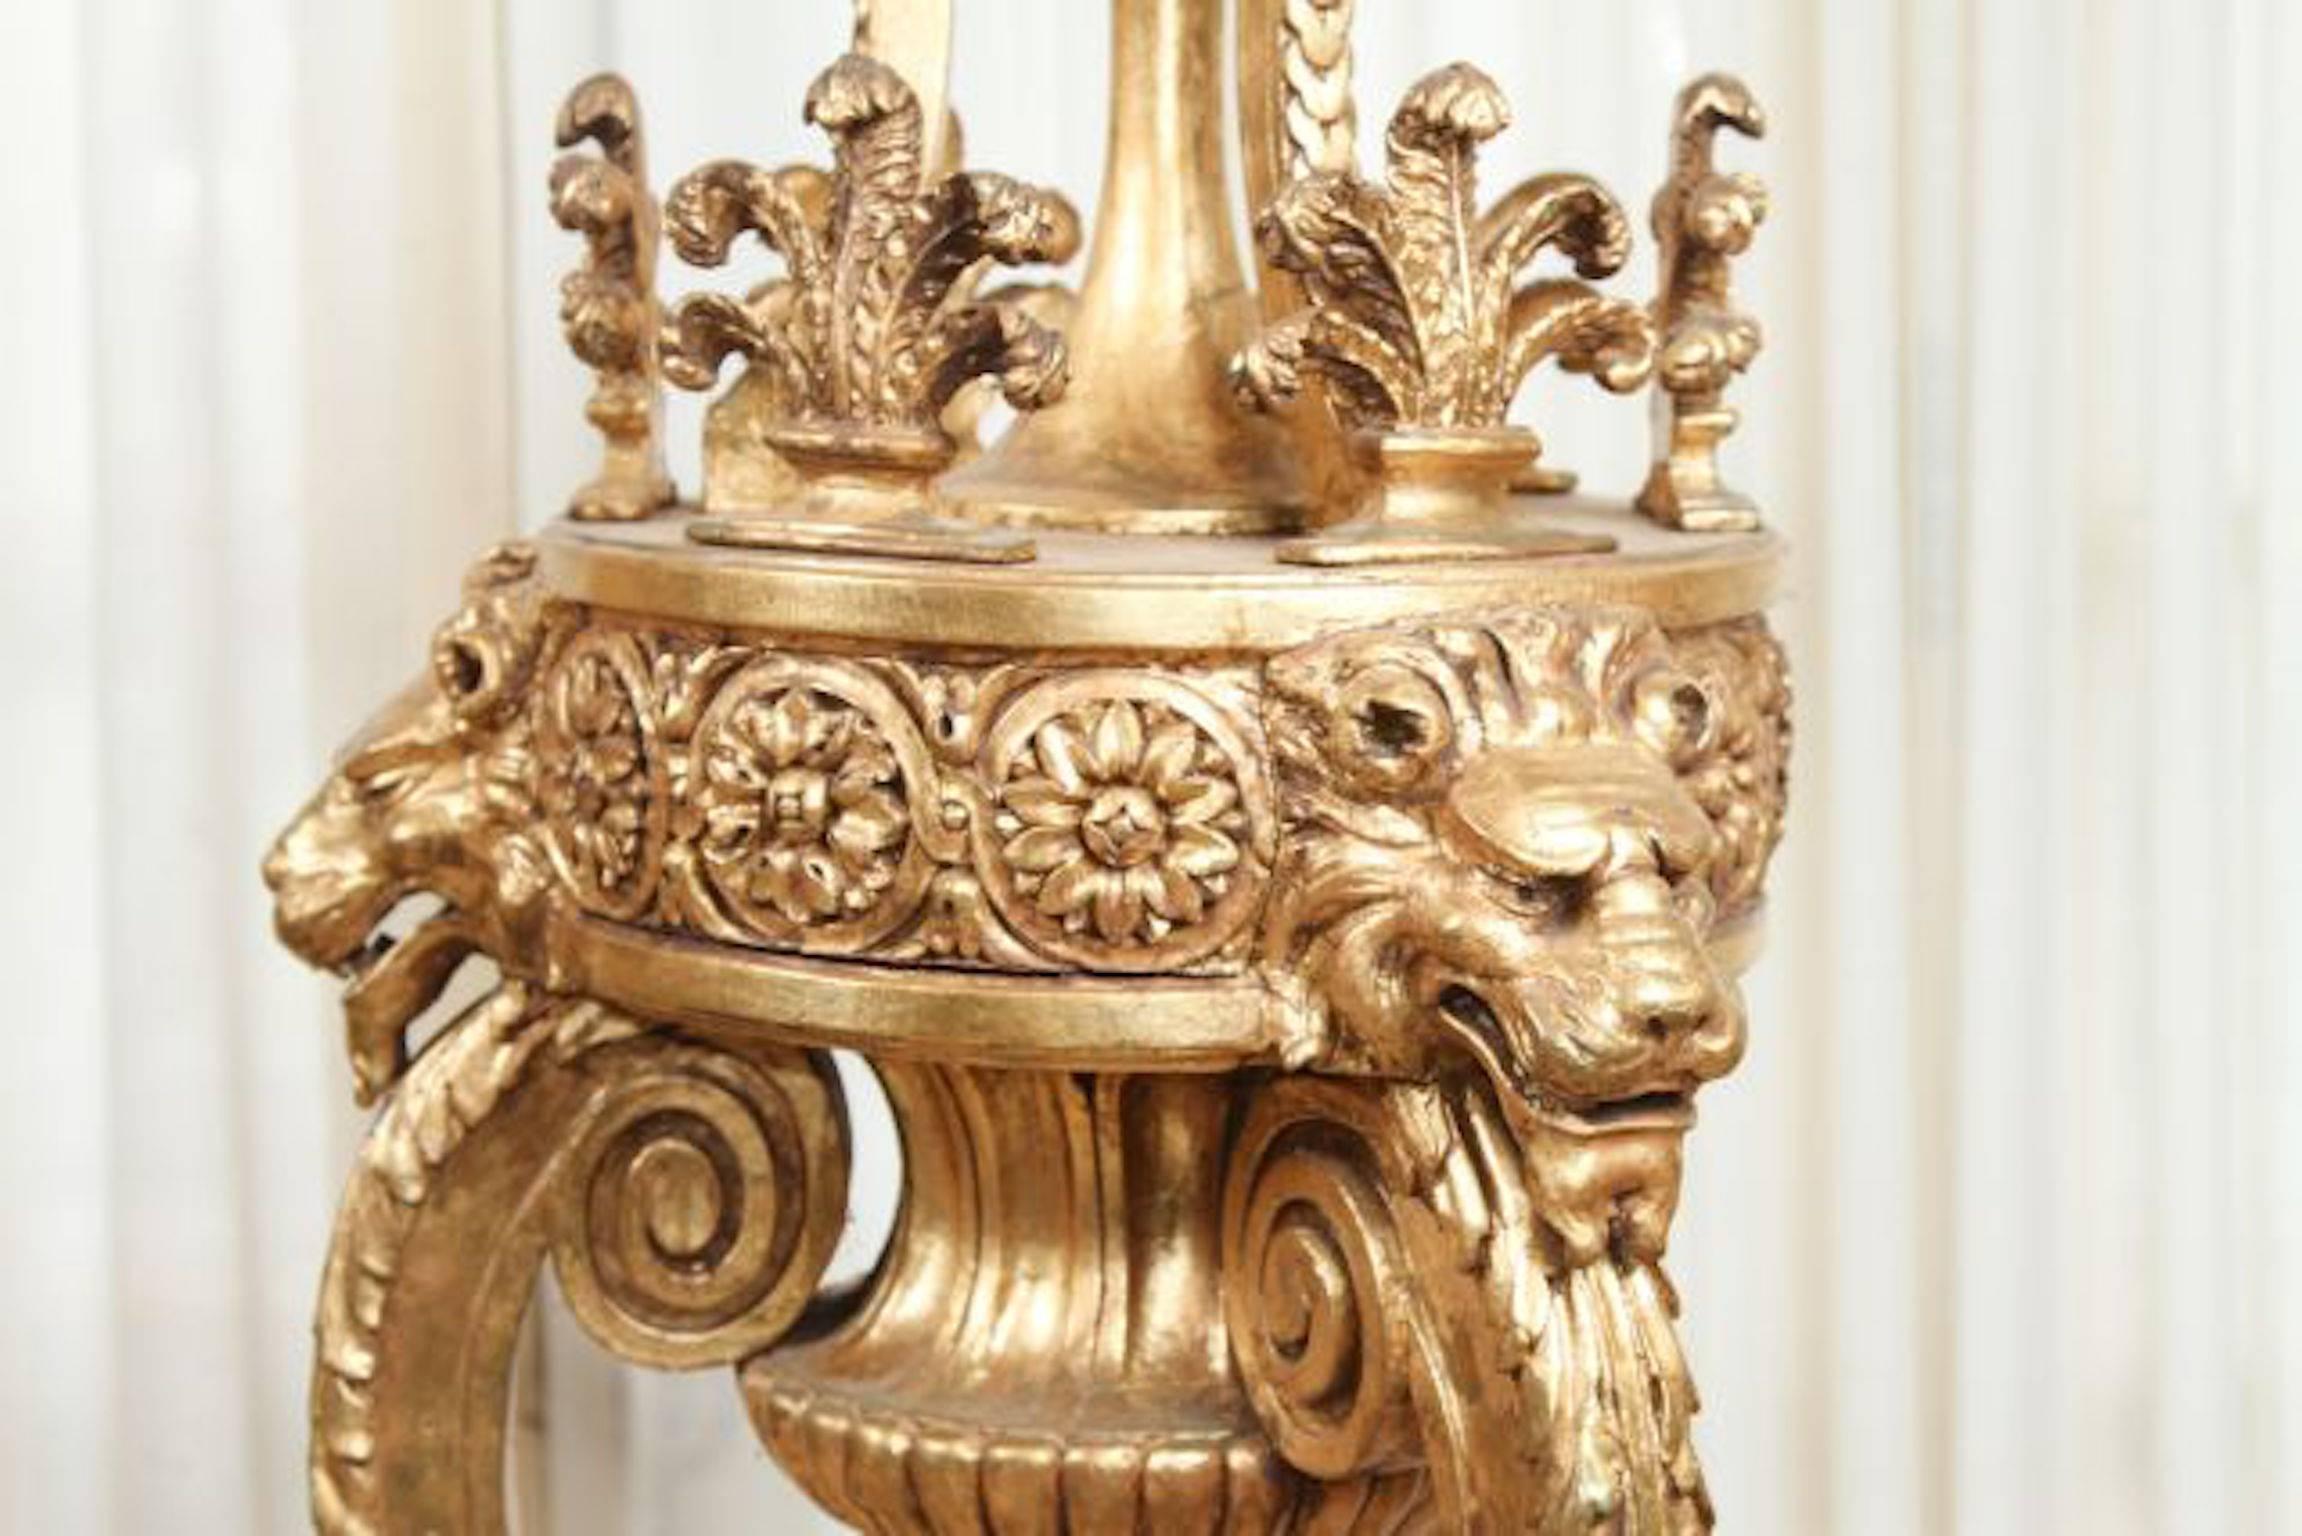 Pair of late 19th century Louis XVI style torchieres with lions head and vase form urn ornamentation on sienna marble bases. Measures: 65